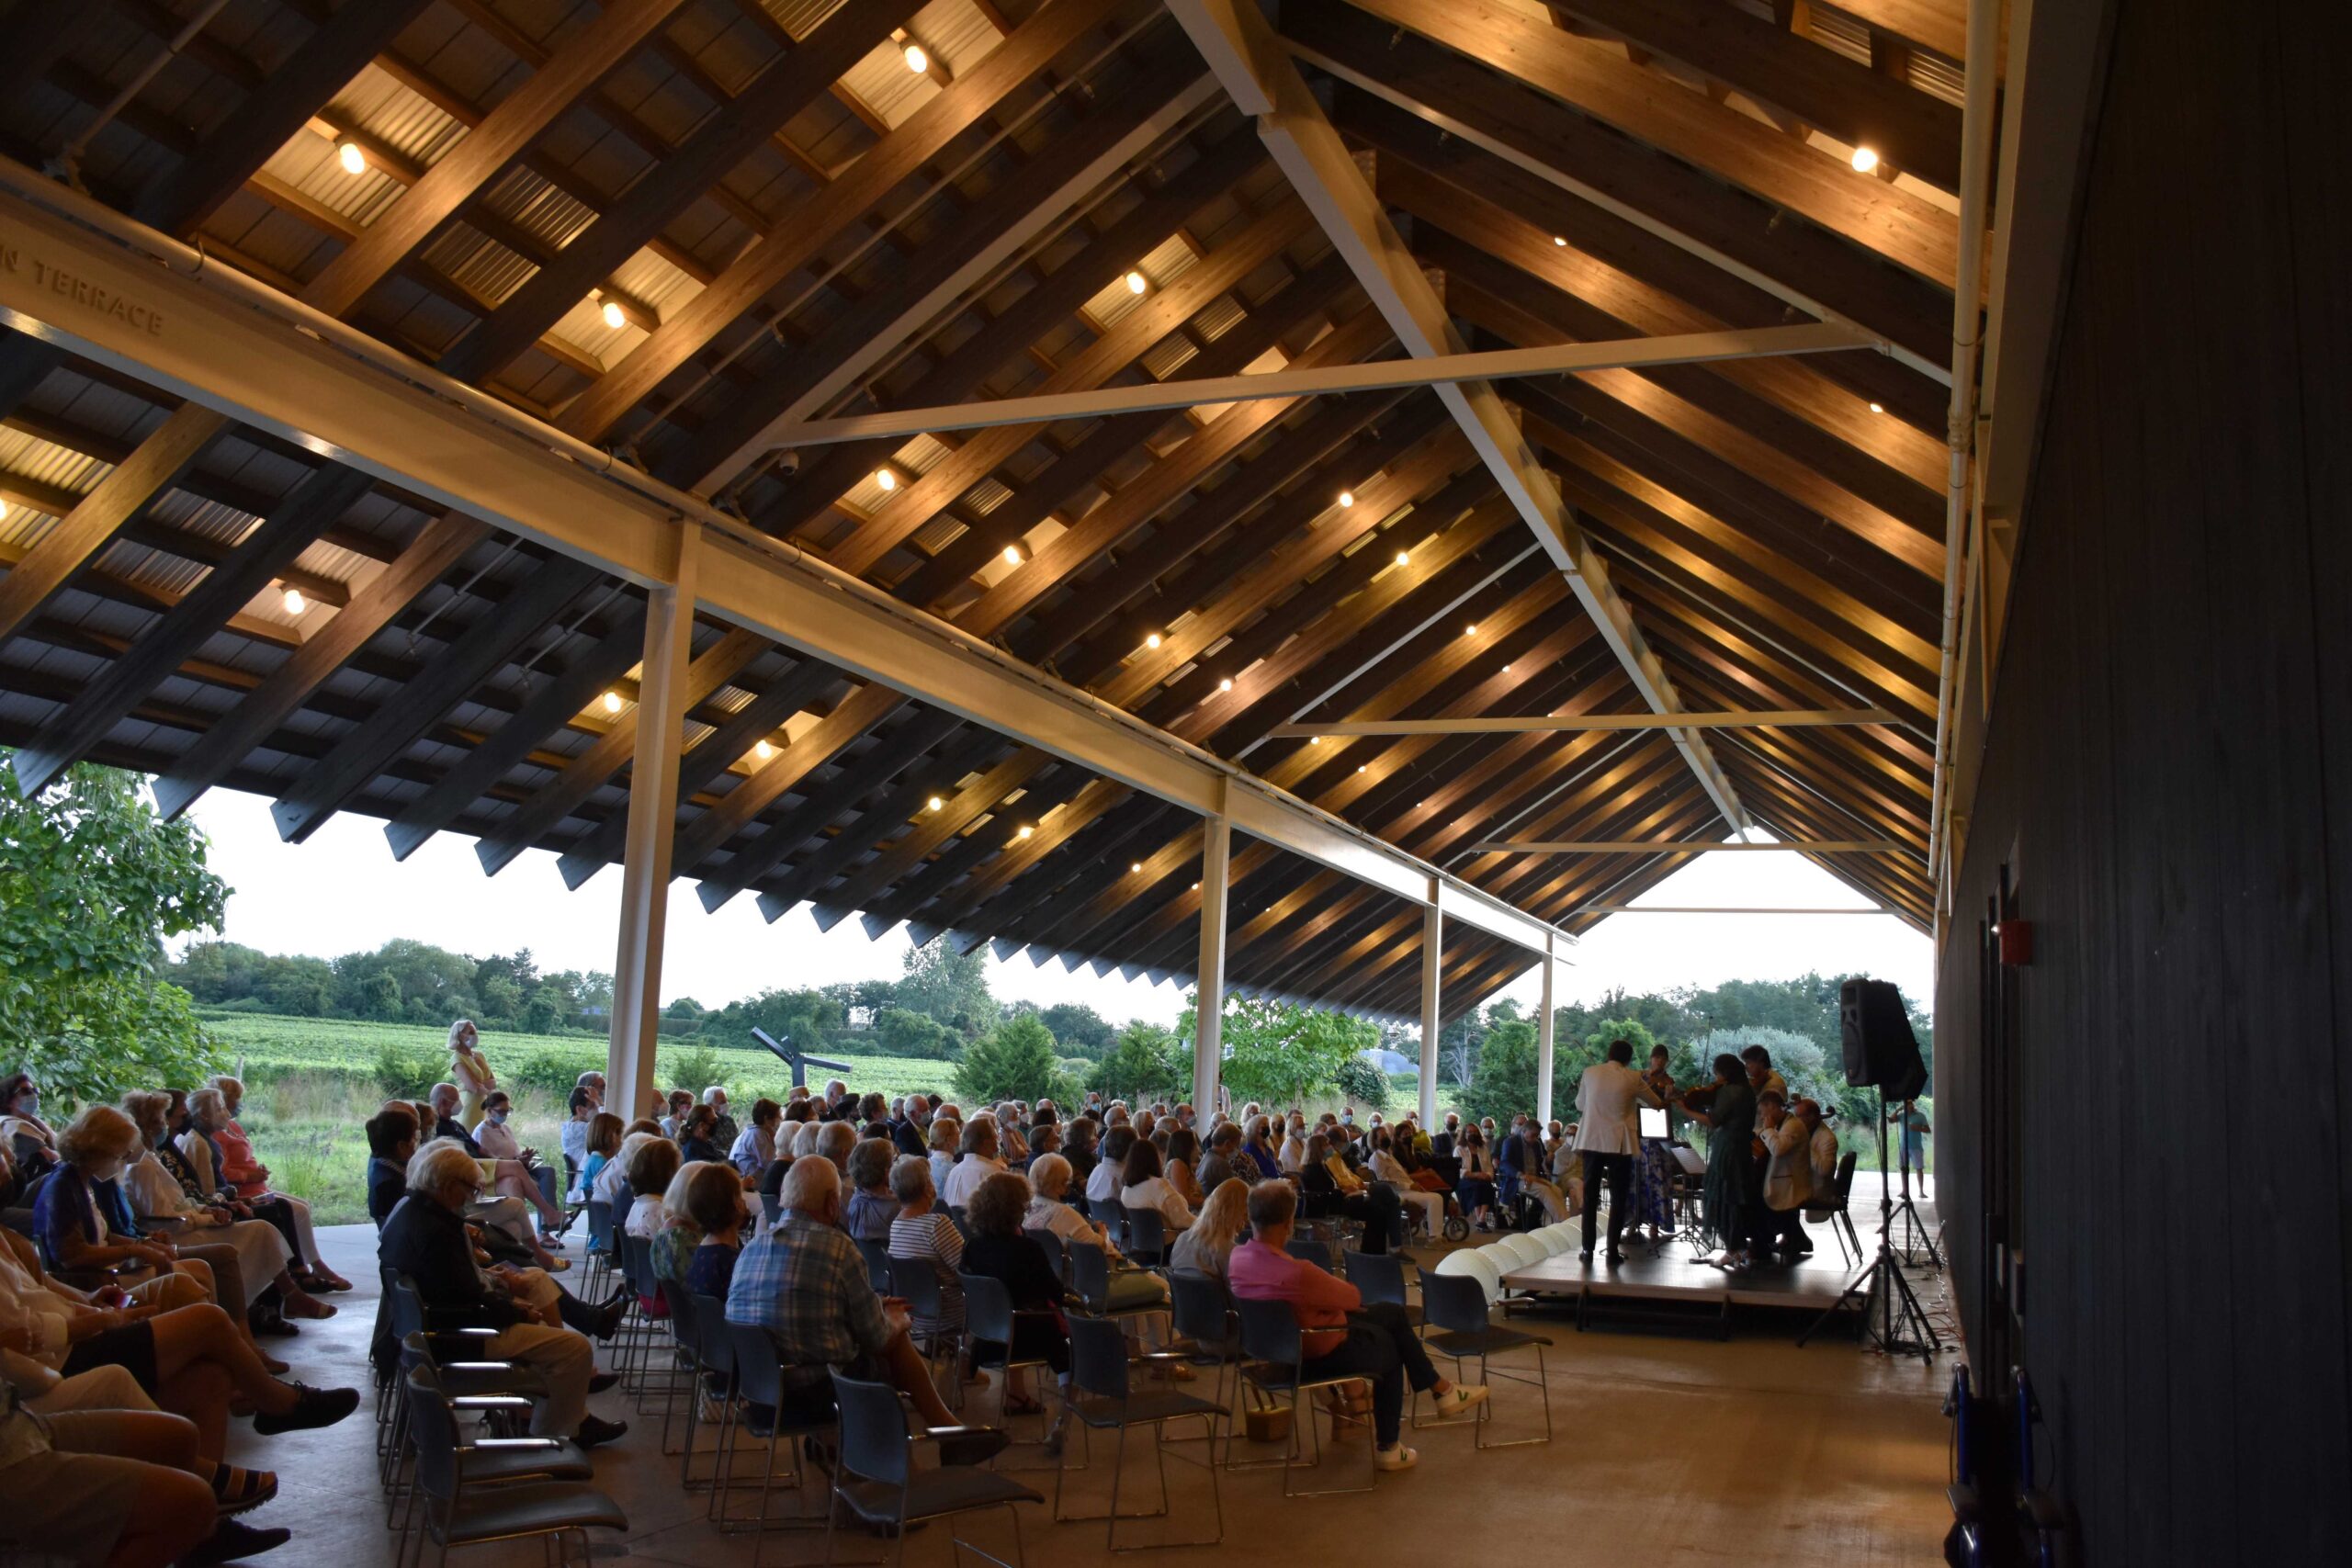 BCMFconcert on the terrace at Parrish Art Museum. MICHAEL LAWRENCE